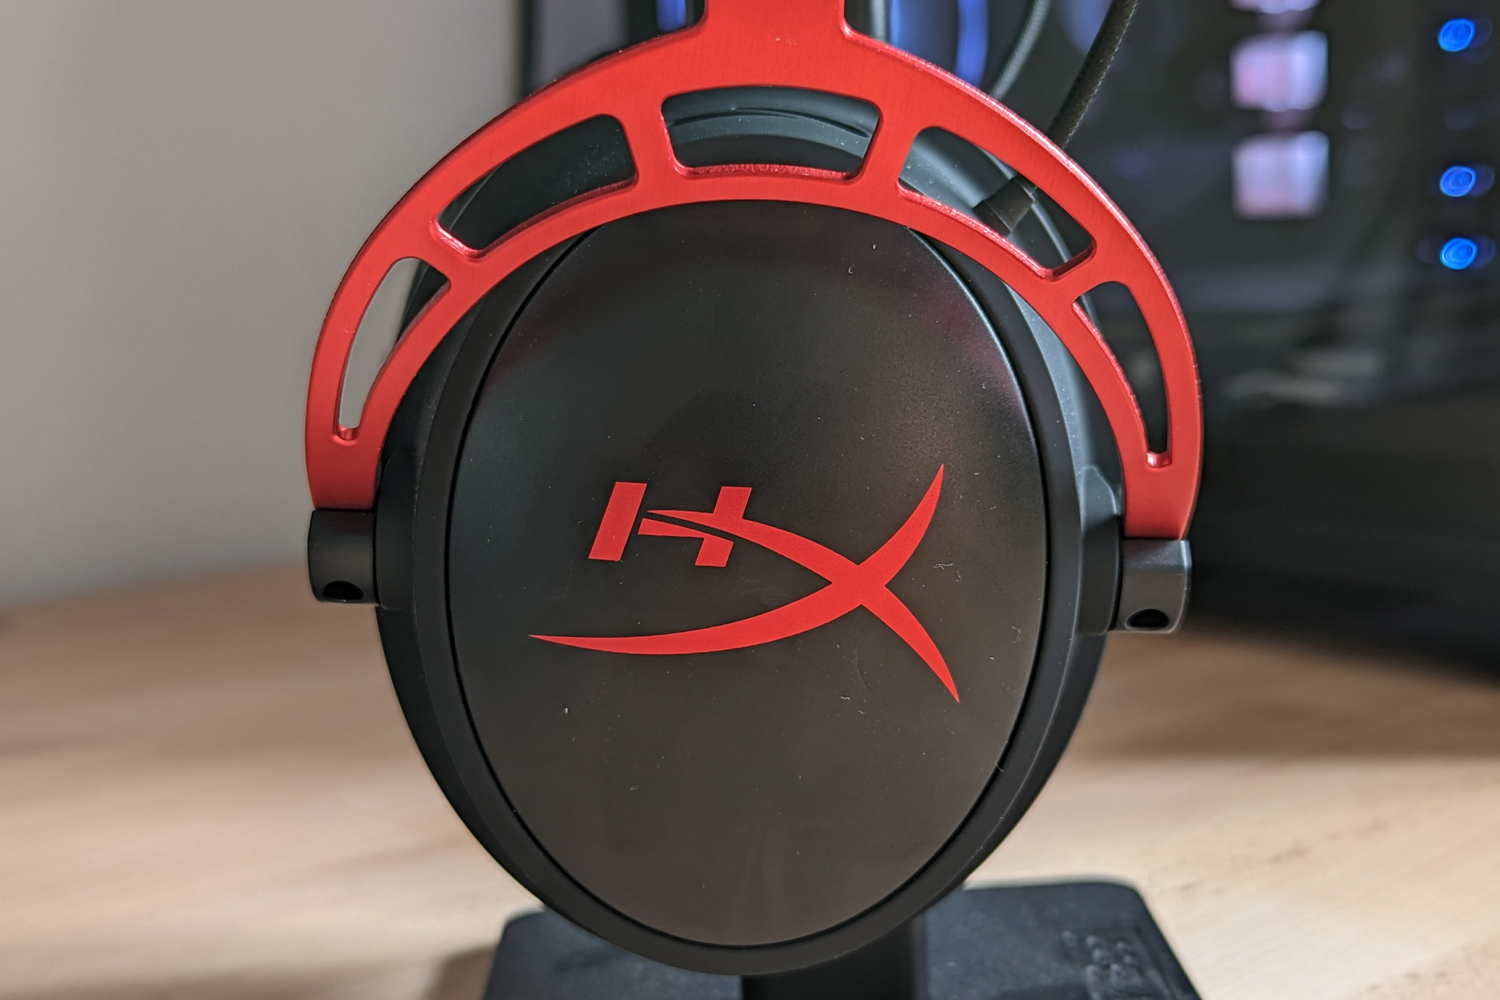 HyperX Cloud Alpha Wireless • See best prices today »